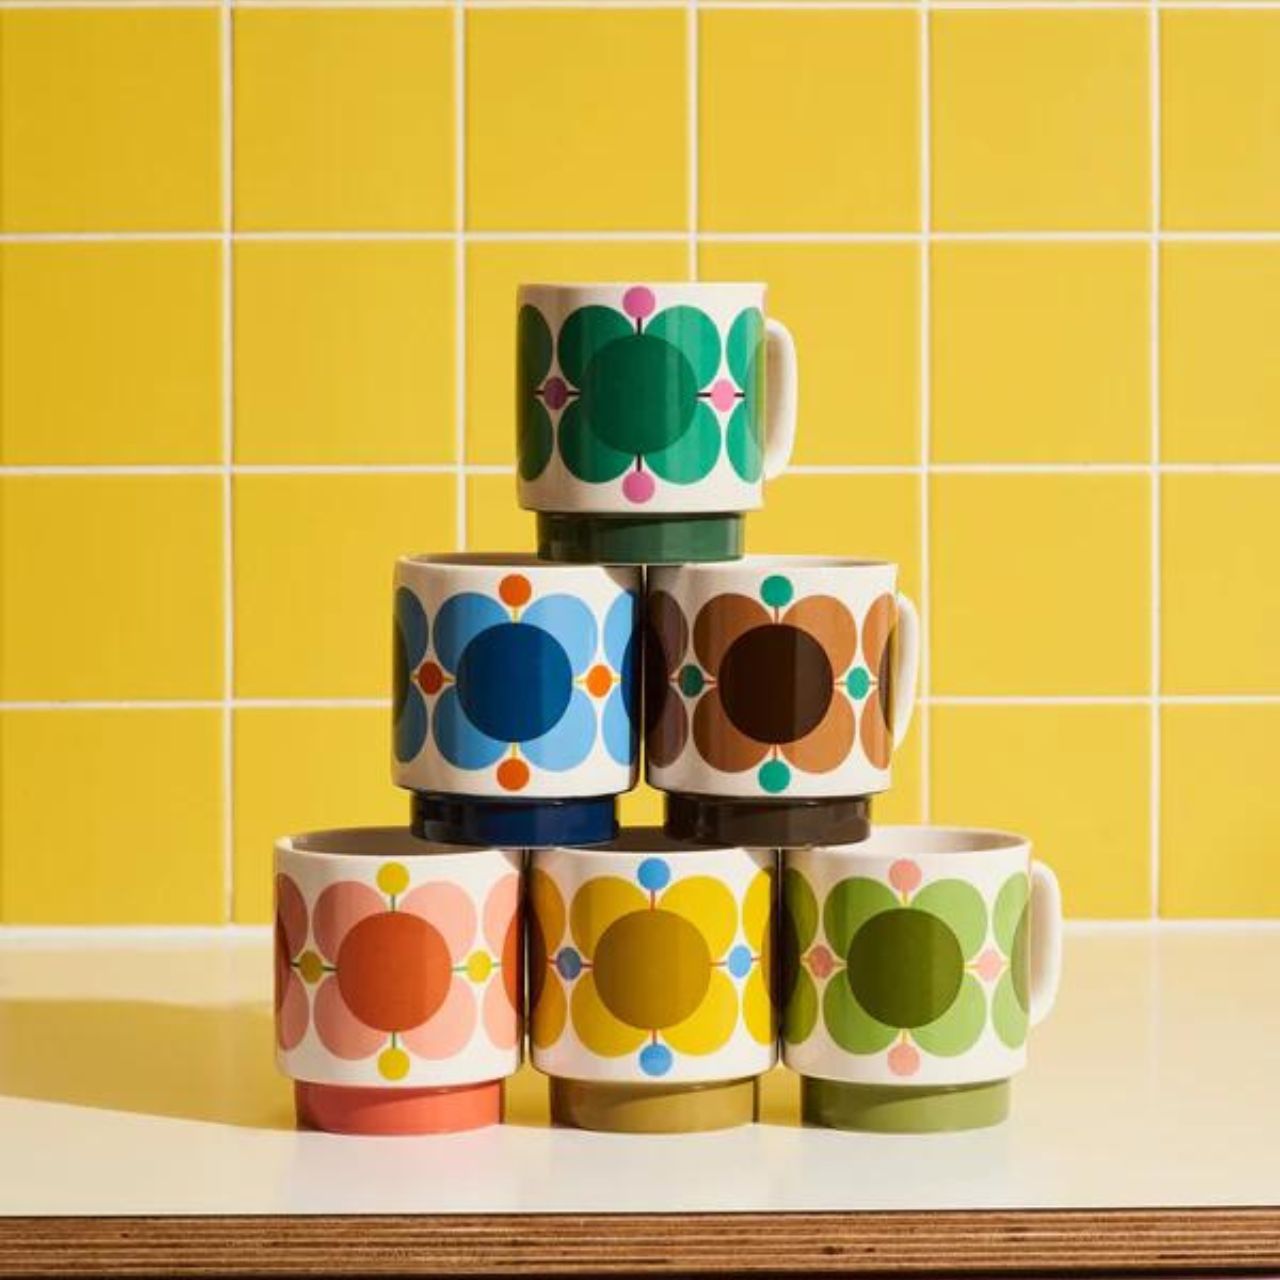 Orla Kiely Set 6 Stacking Mugs - Atomic Flower  DESIGNED IN THE UK BY ORLA KIELY: This set of six mugs has a unique 'Atomic Flower' print and is designed to be stacked.  Each mug is stamped with an authentic Orla Kiely logo.